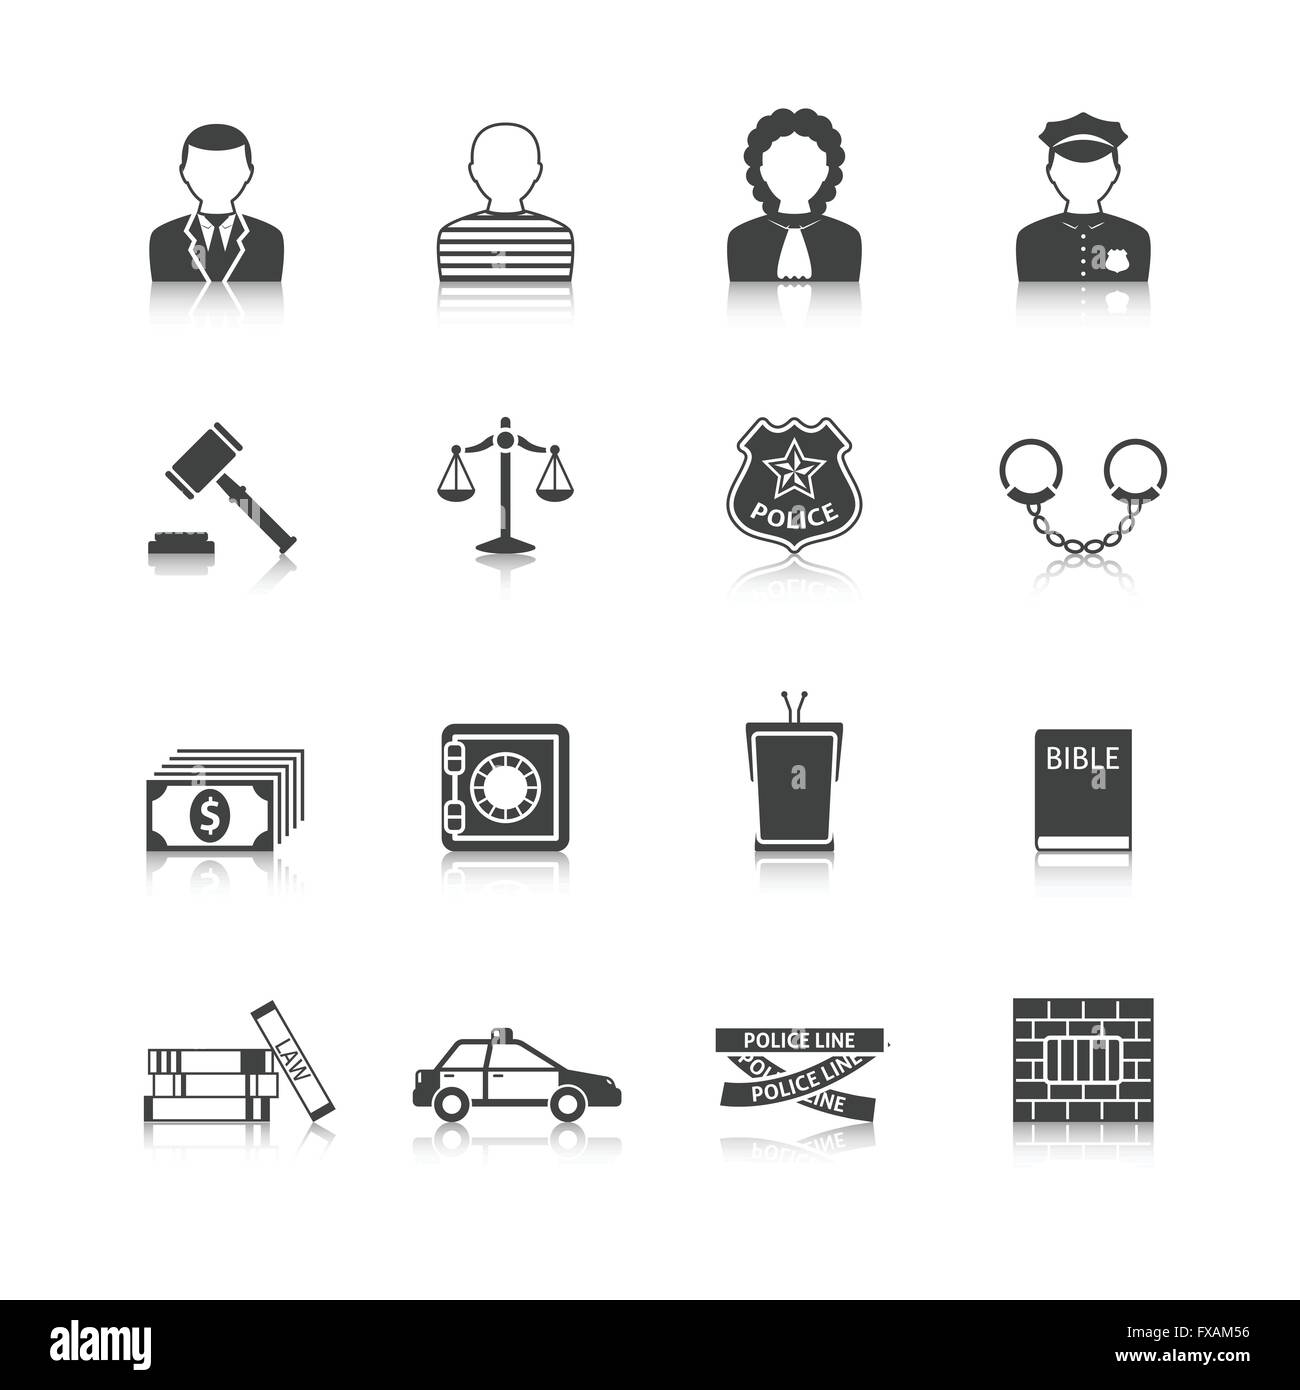 Crime and Punishments Icons Set Stock Vector